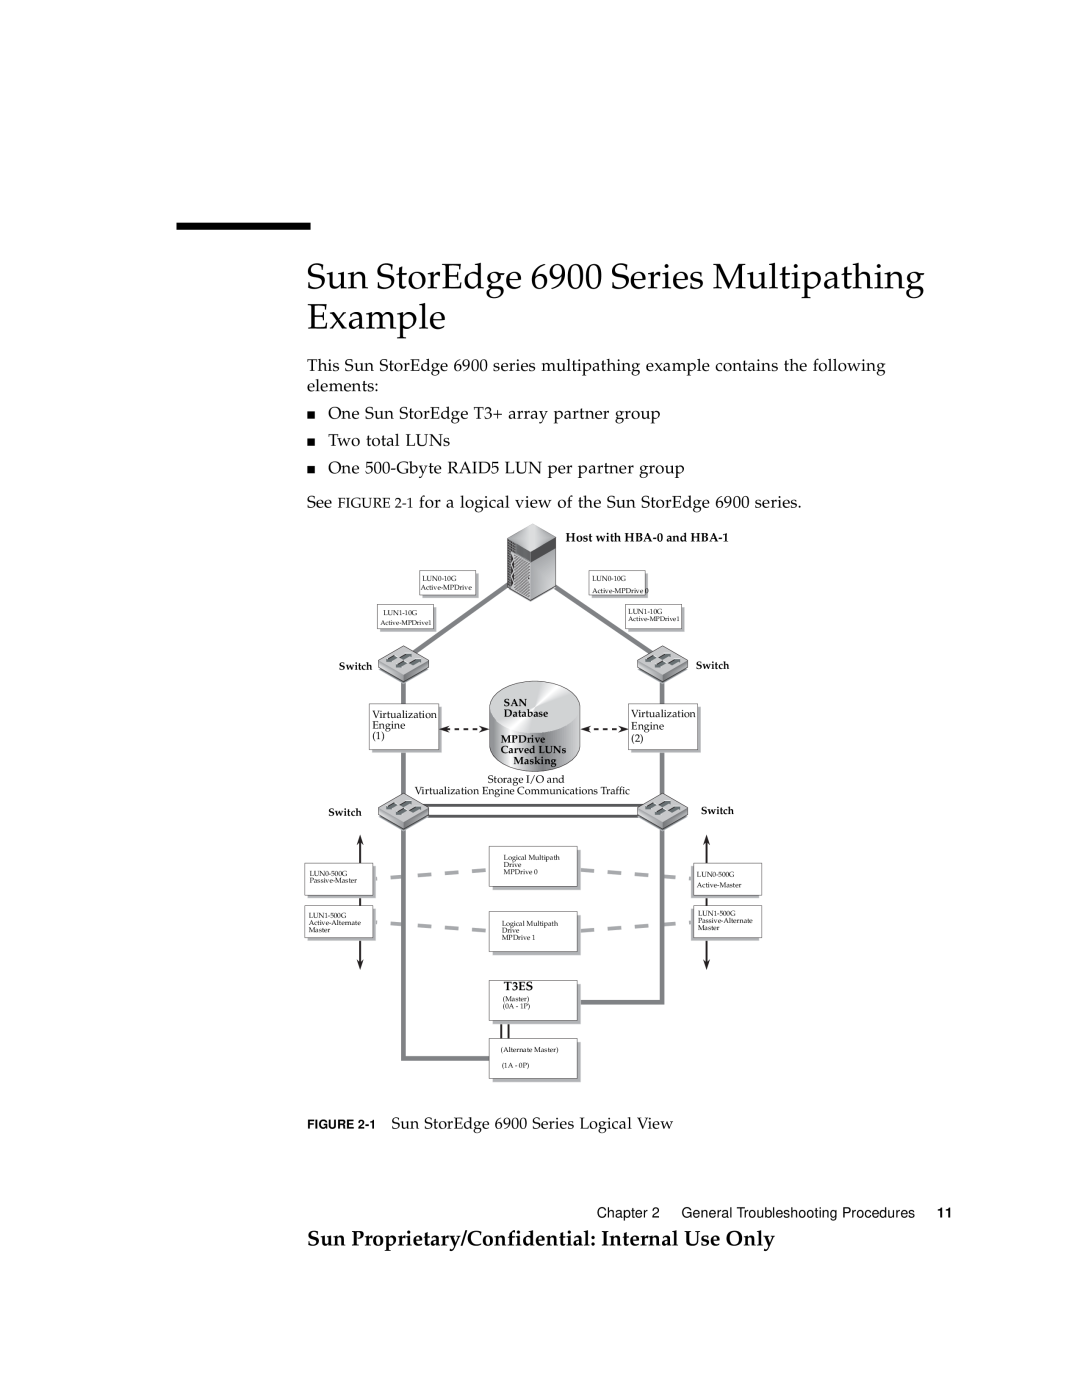 Sun Microsystems Sun StorEdge 6900 Series Multipathing Example, Sun Proprietary/Confidential Internal Use Only, T3ES 